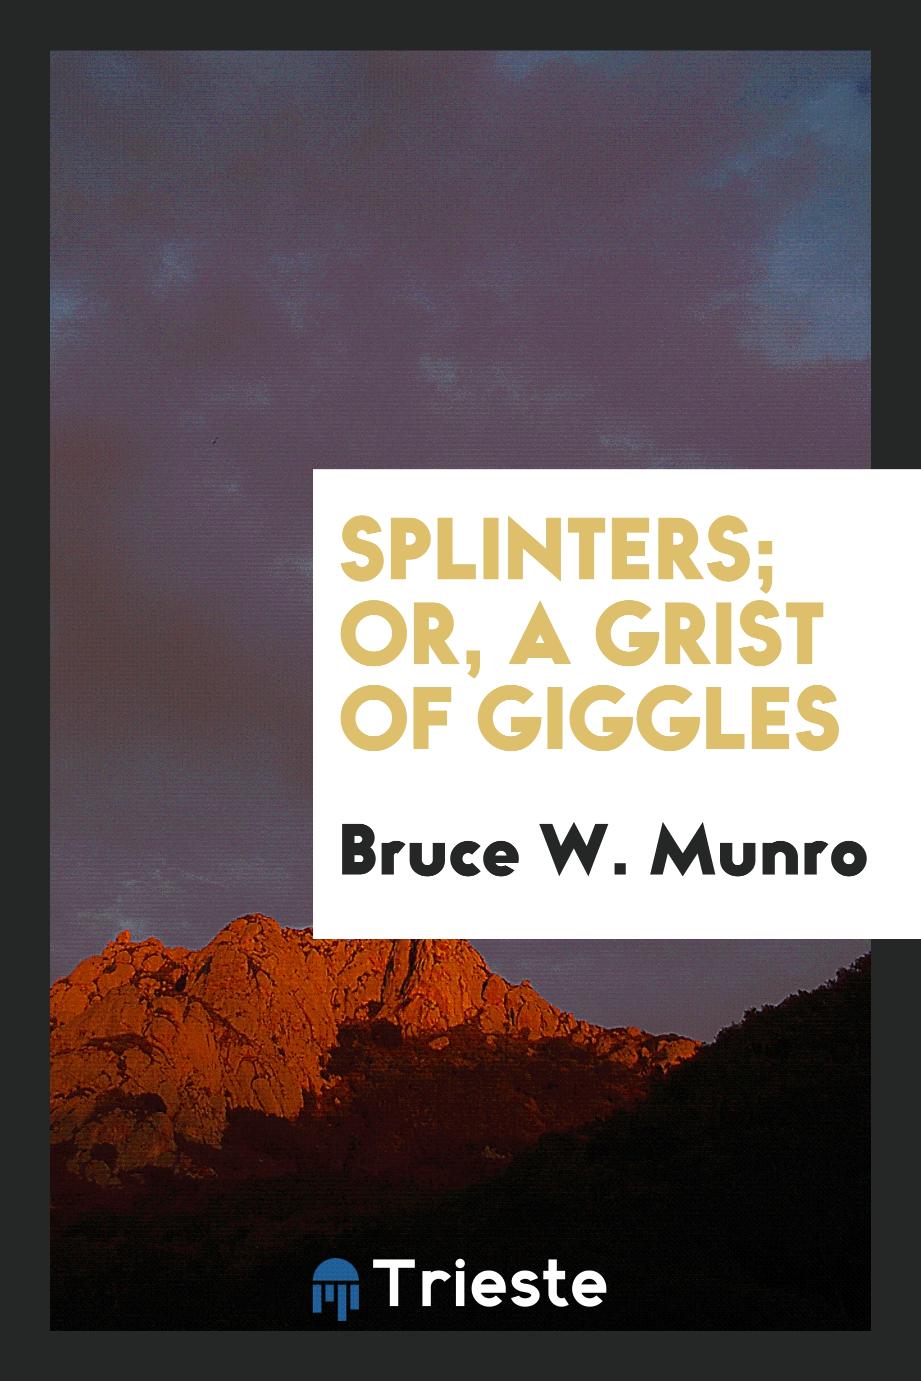 Splinters; or, A grist of giggles